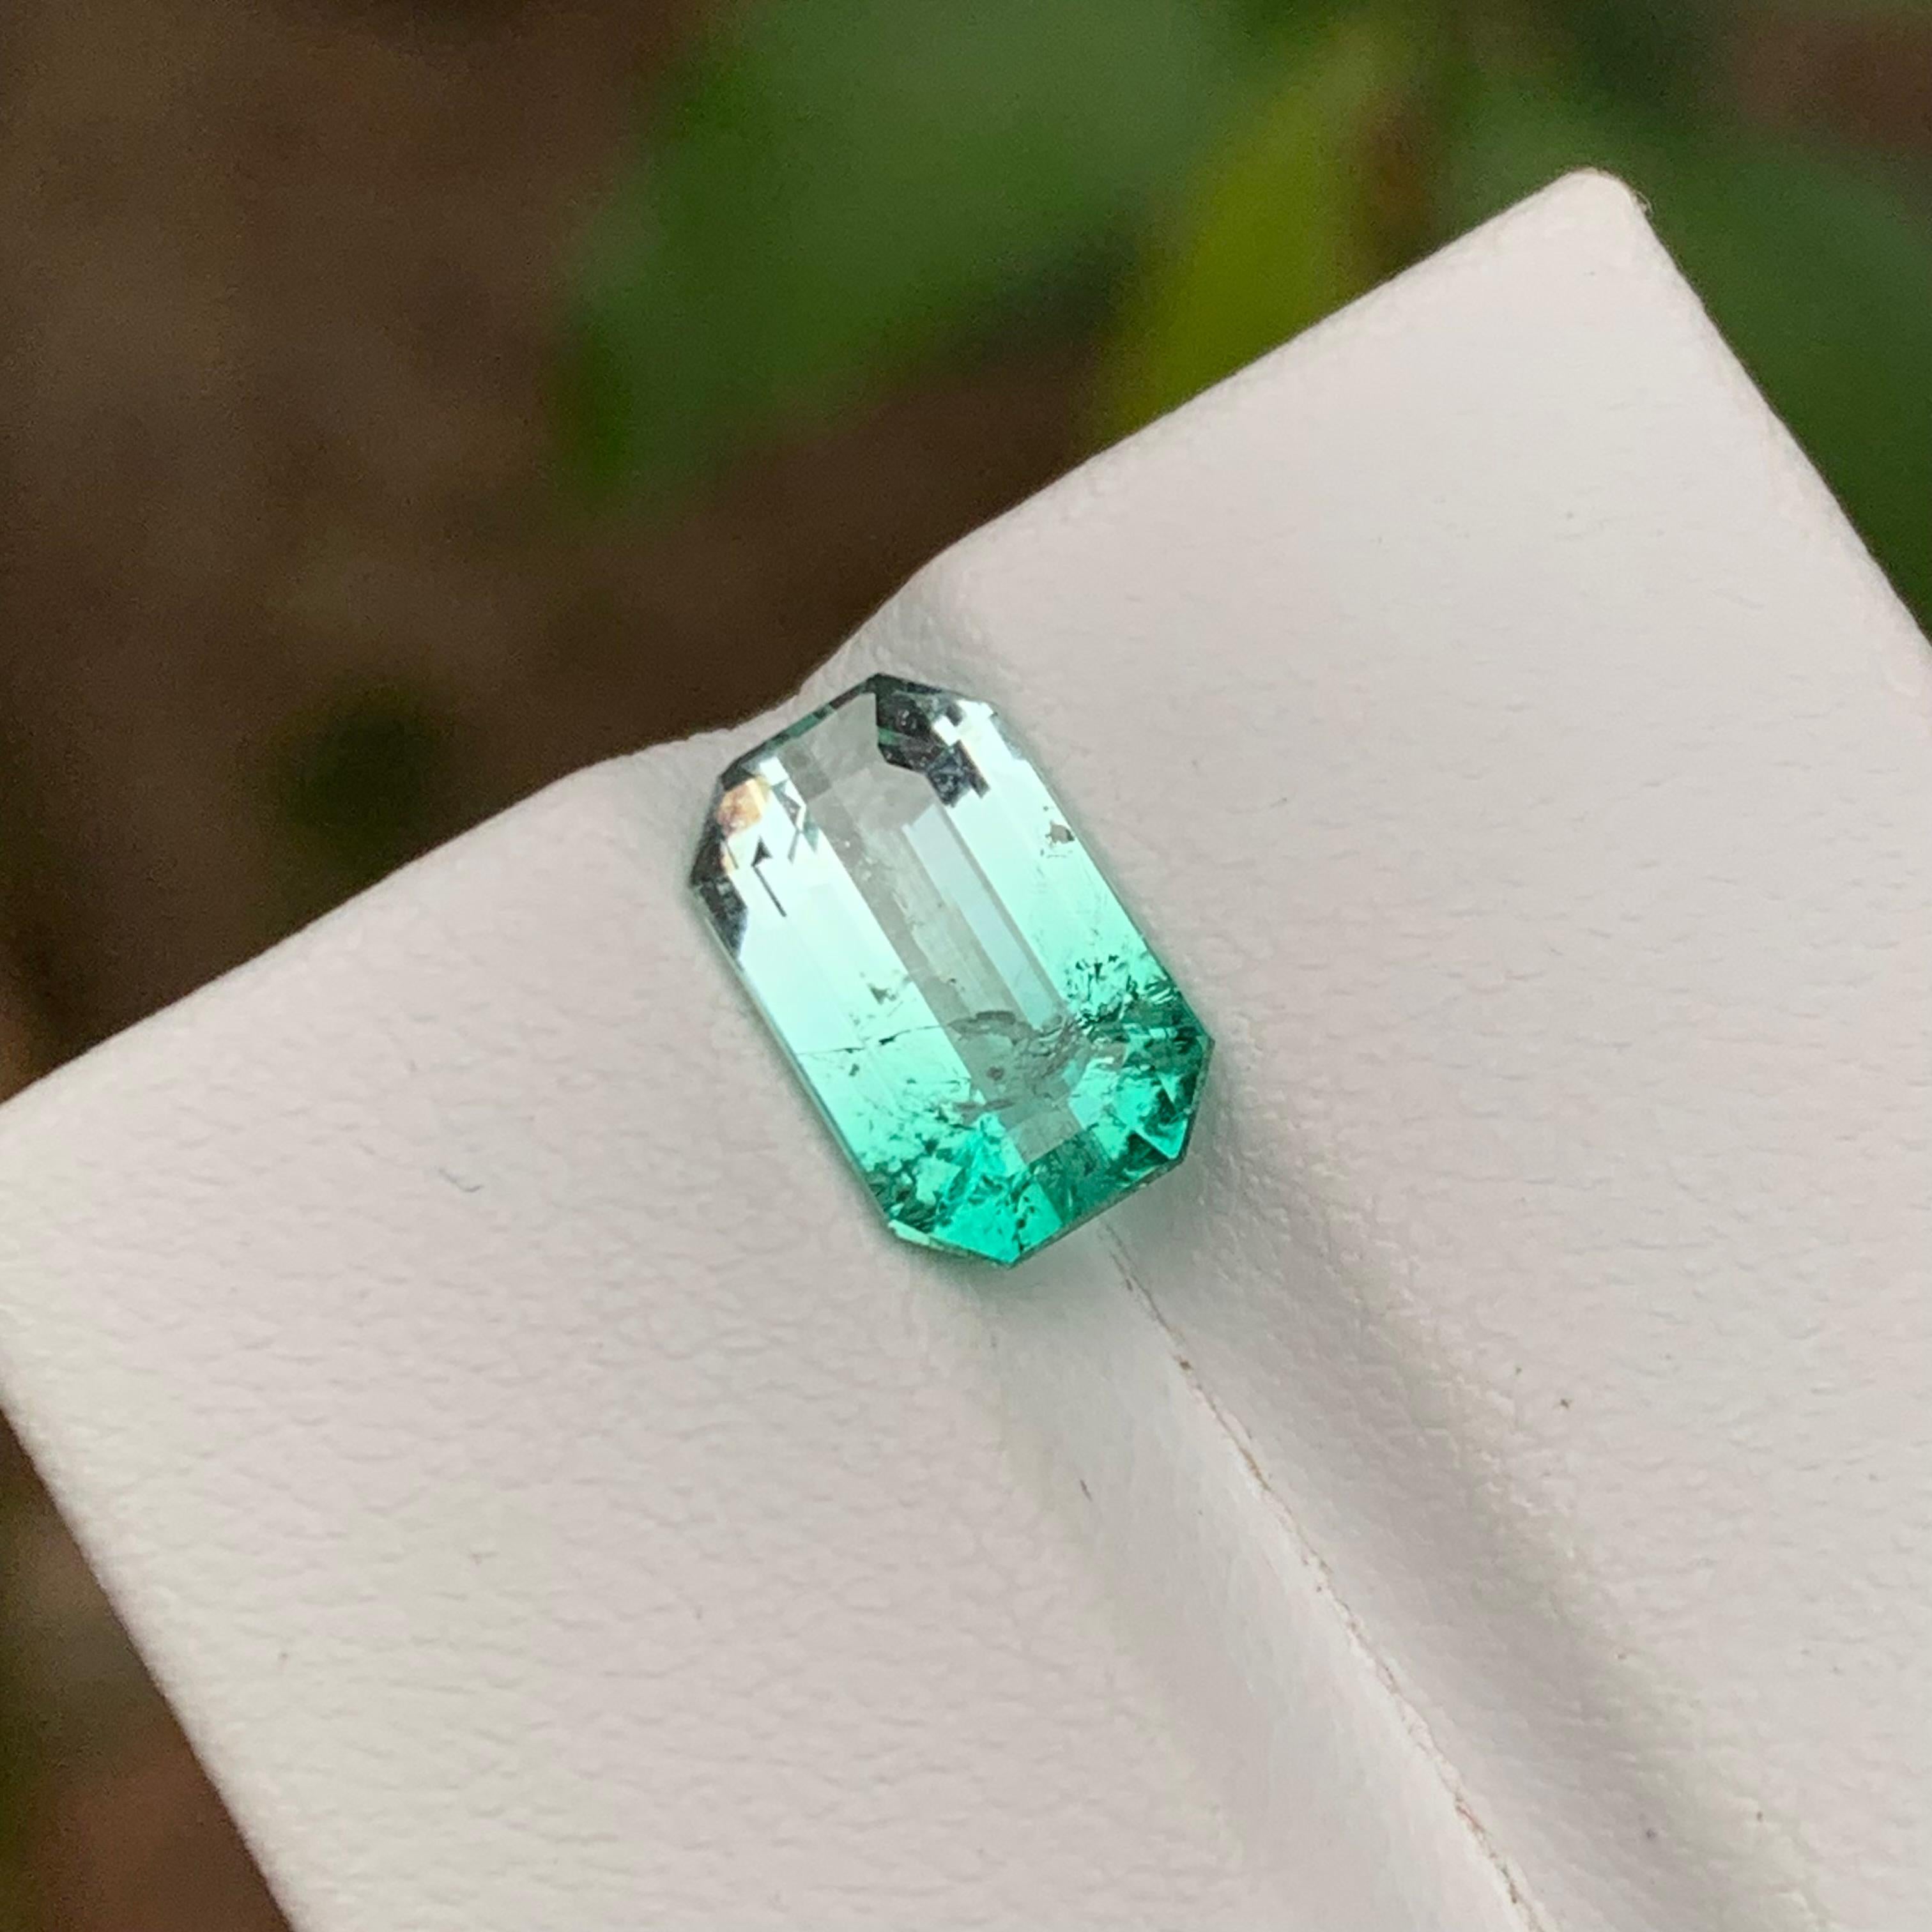 GEMSTONE TYPE: Tourmaline
PIECE(S): 1
WEIGHT: 2.65 Carats
SHAPE: Emerald
SIZE (MM): 10.36 x 6.52 x 4.64
COLOR: Electric Bluish Green & White Bicolor
CLARITY: Slightly Included 
TREATMENT: None
ORIGIN: Afghanistan
CERTIFICATE: On demand

here’s an